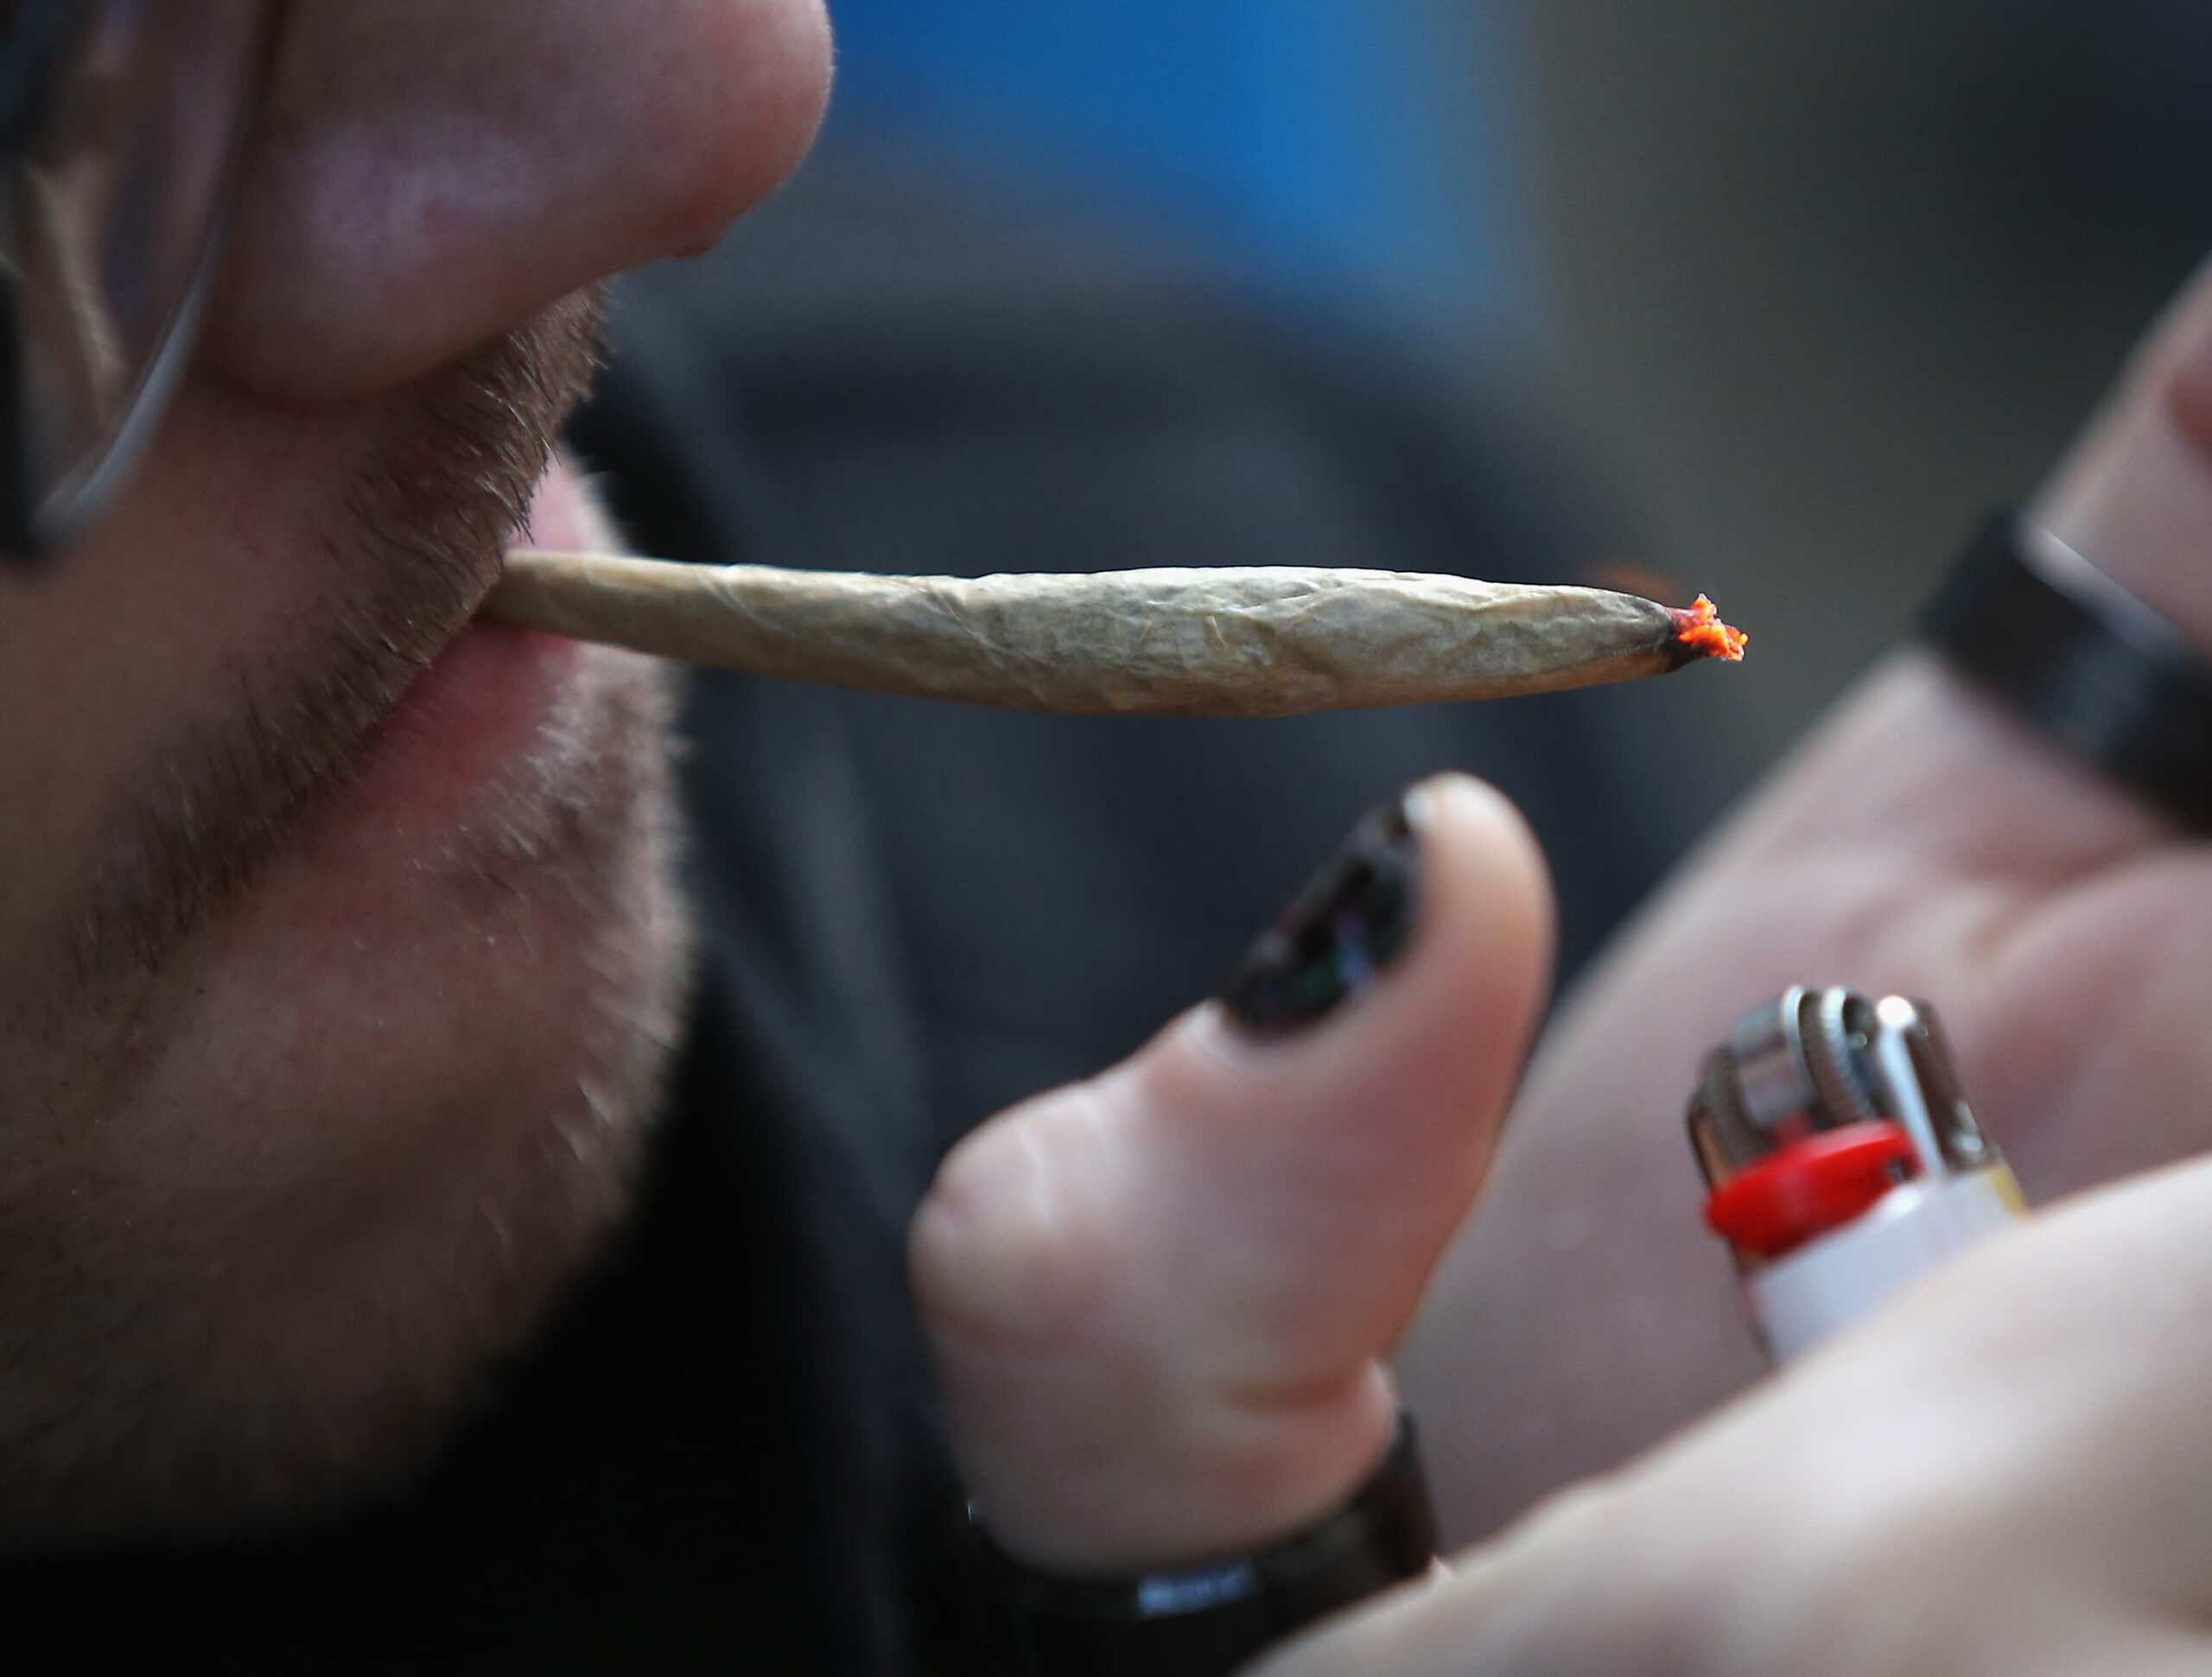 People Officially Love Weed More Than Cigs in 16 Cities Across the US, Survey Says